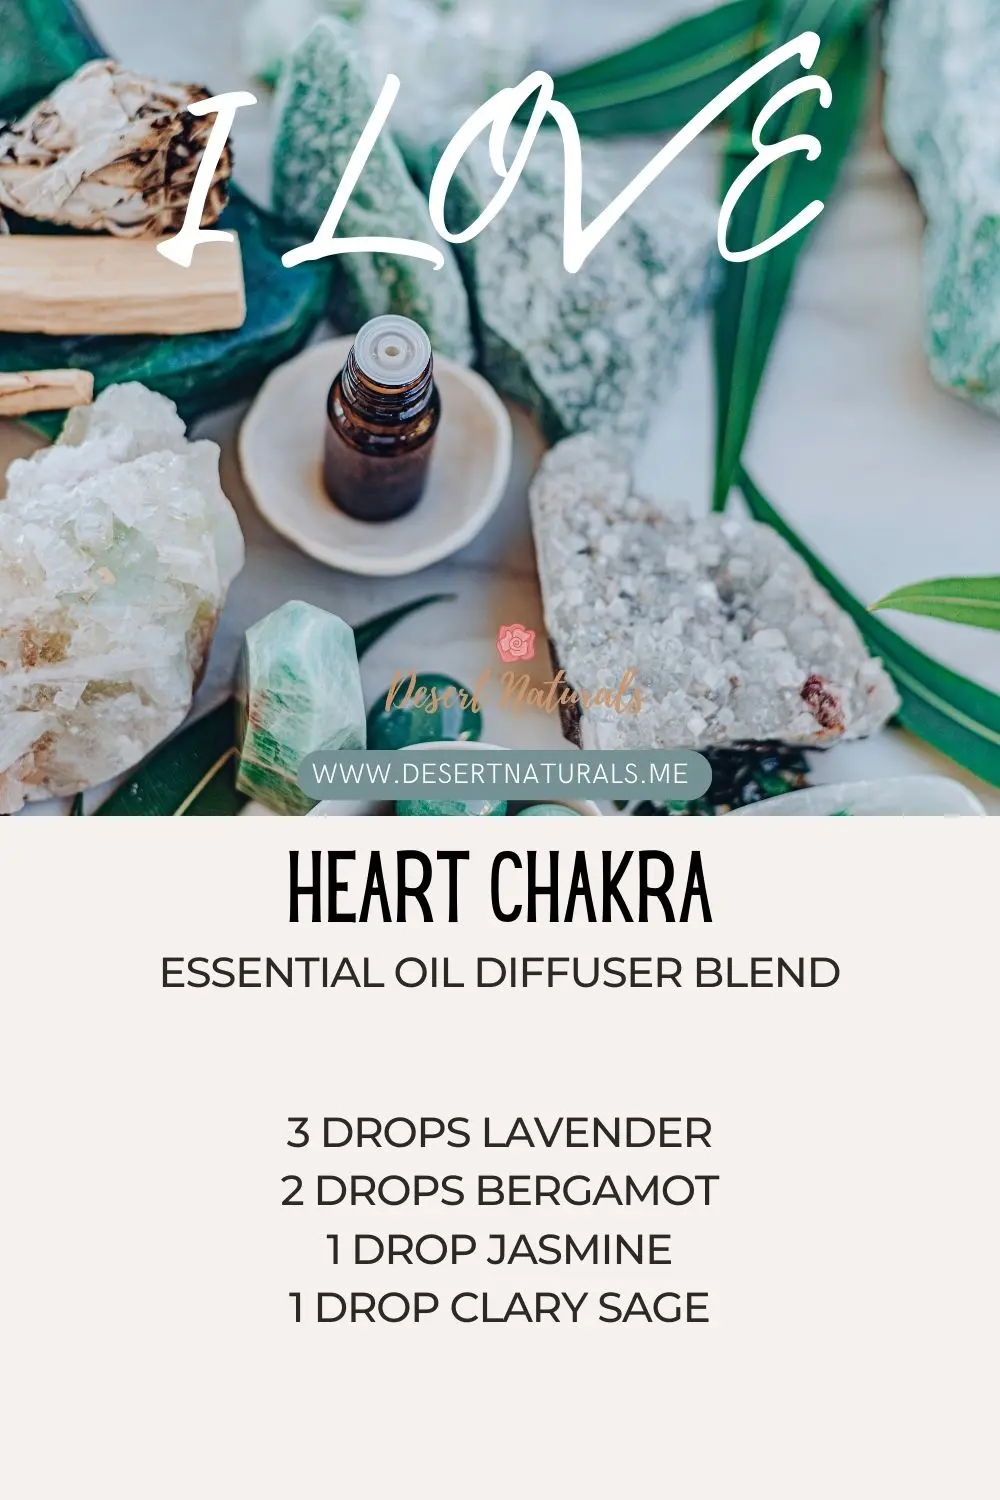 essential oil diffuser blend for the heart chakra with image of oil bottle, green crystals